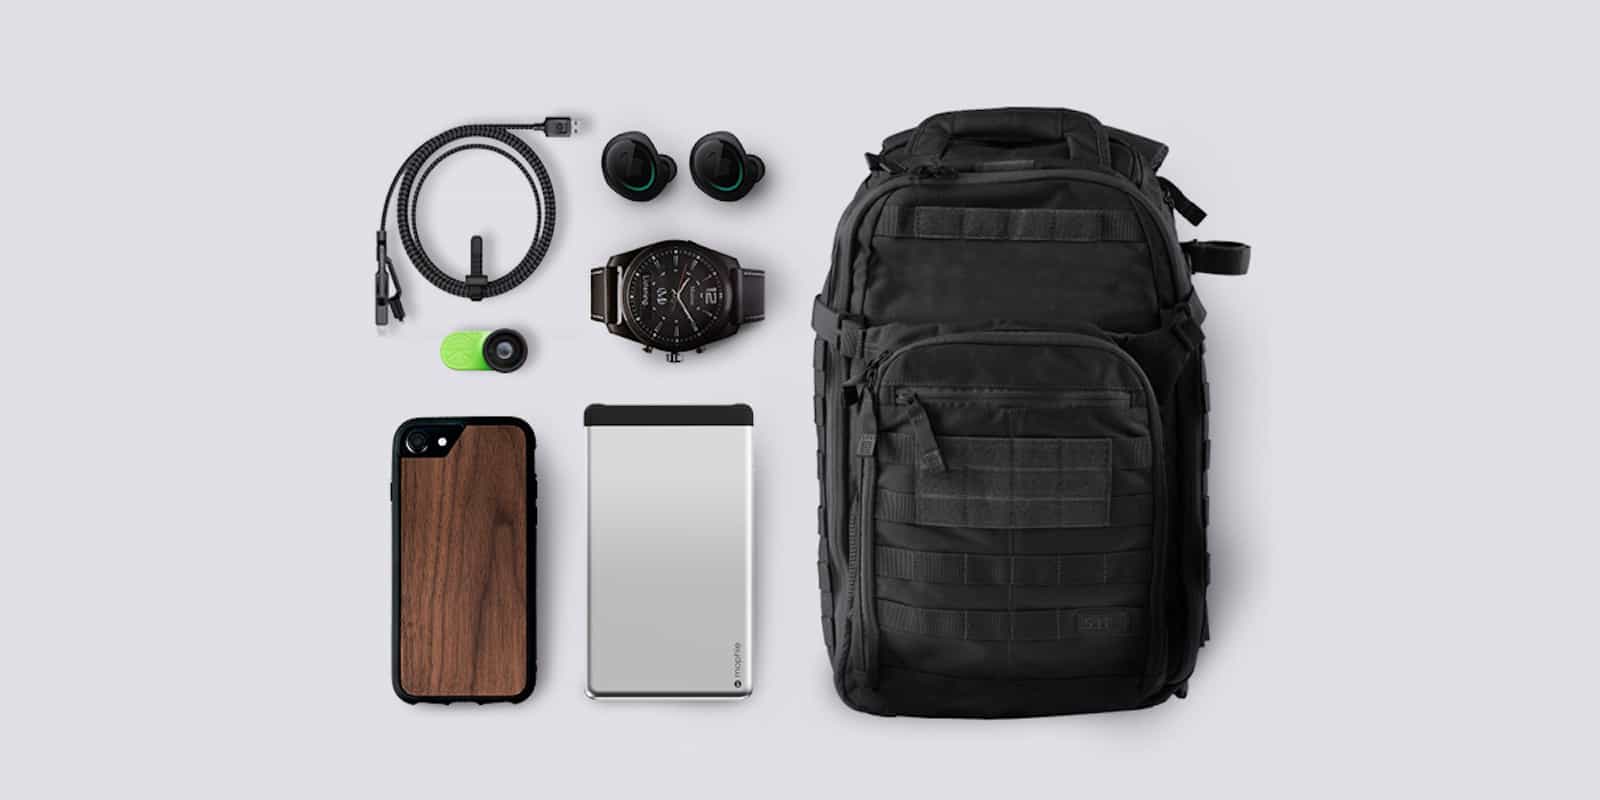 This giveaway bundle includes smartwatches, backup batteries, ultra tough iPhone cases, and lots more.